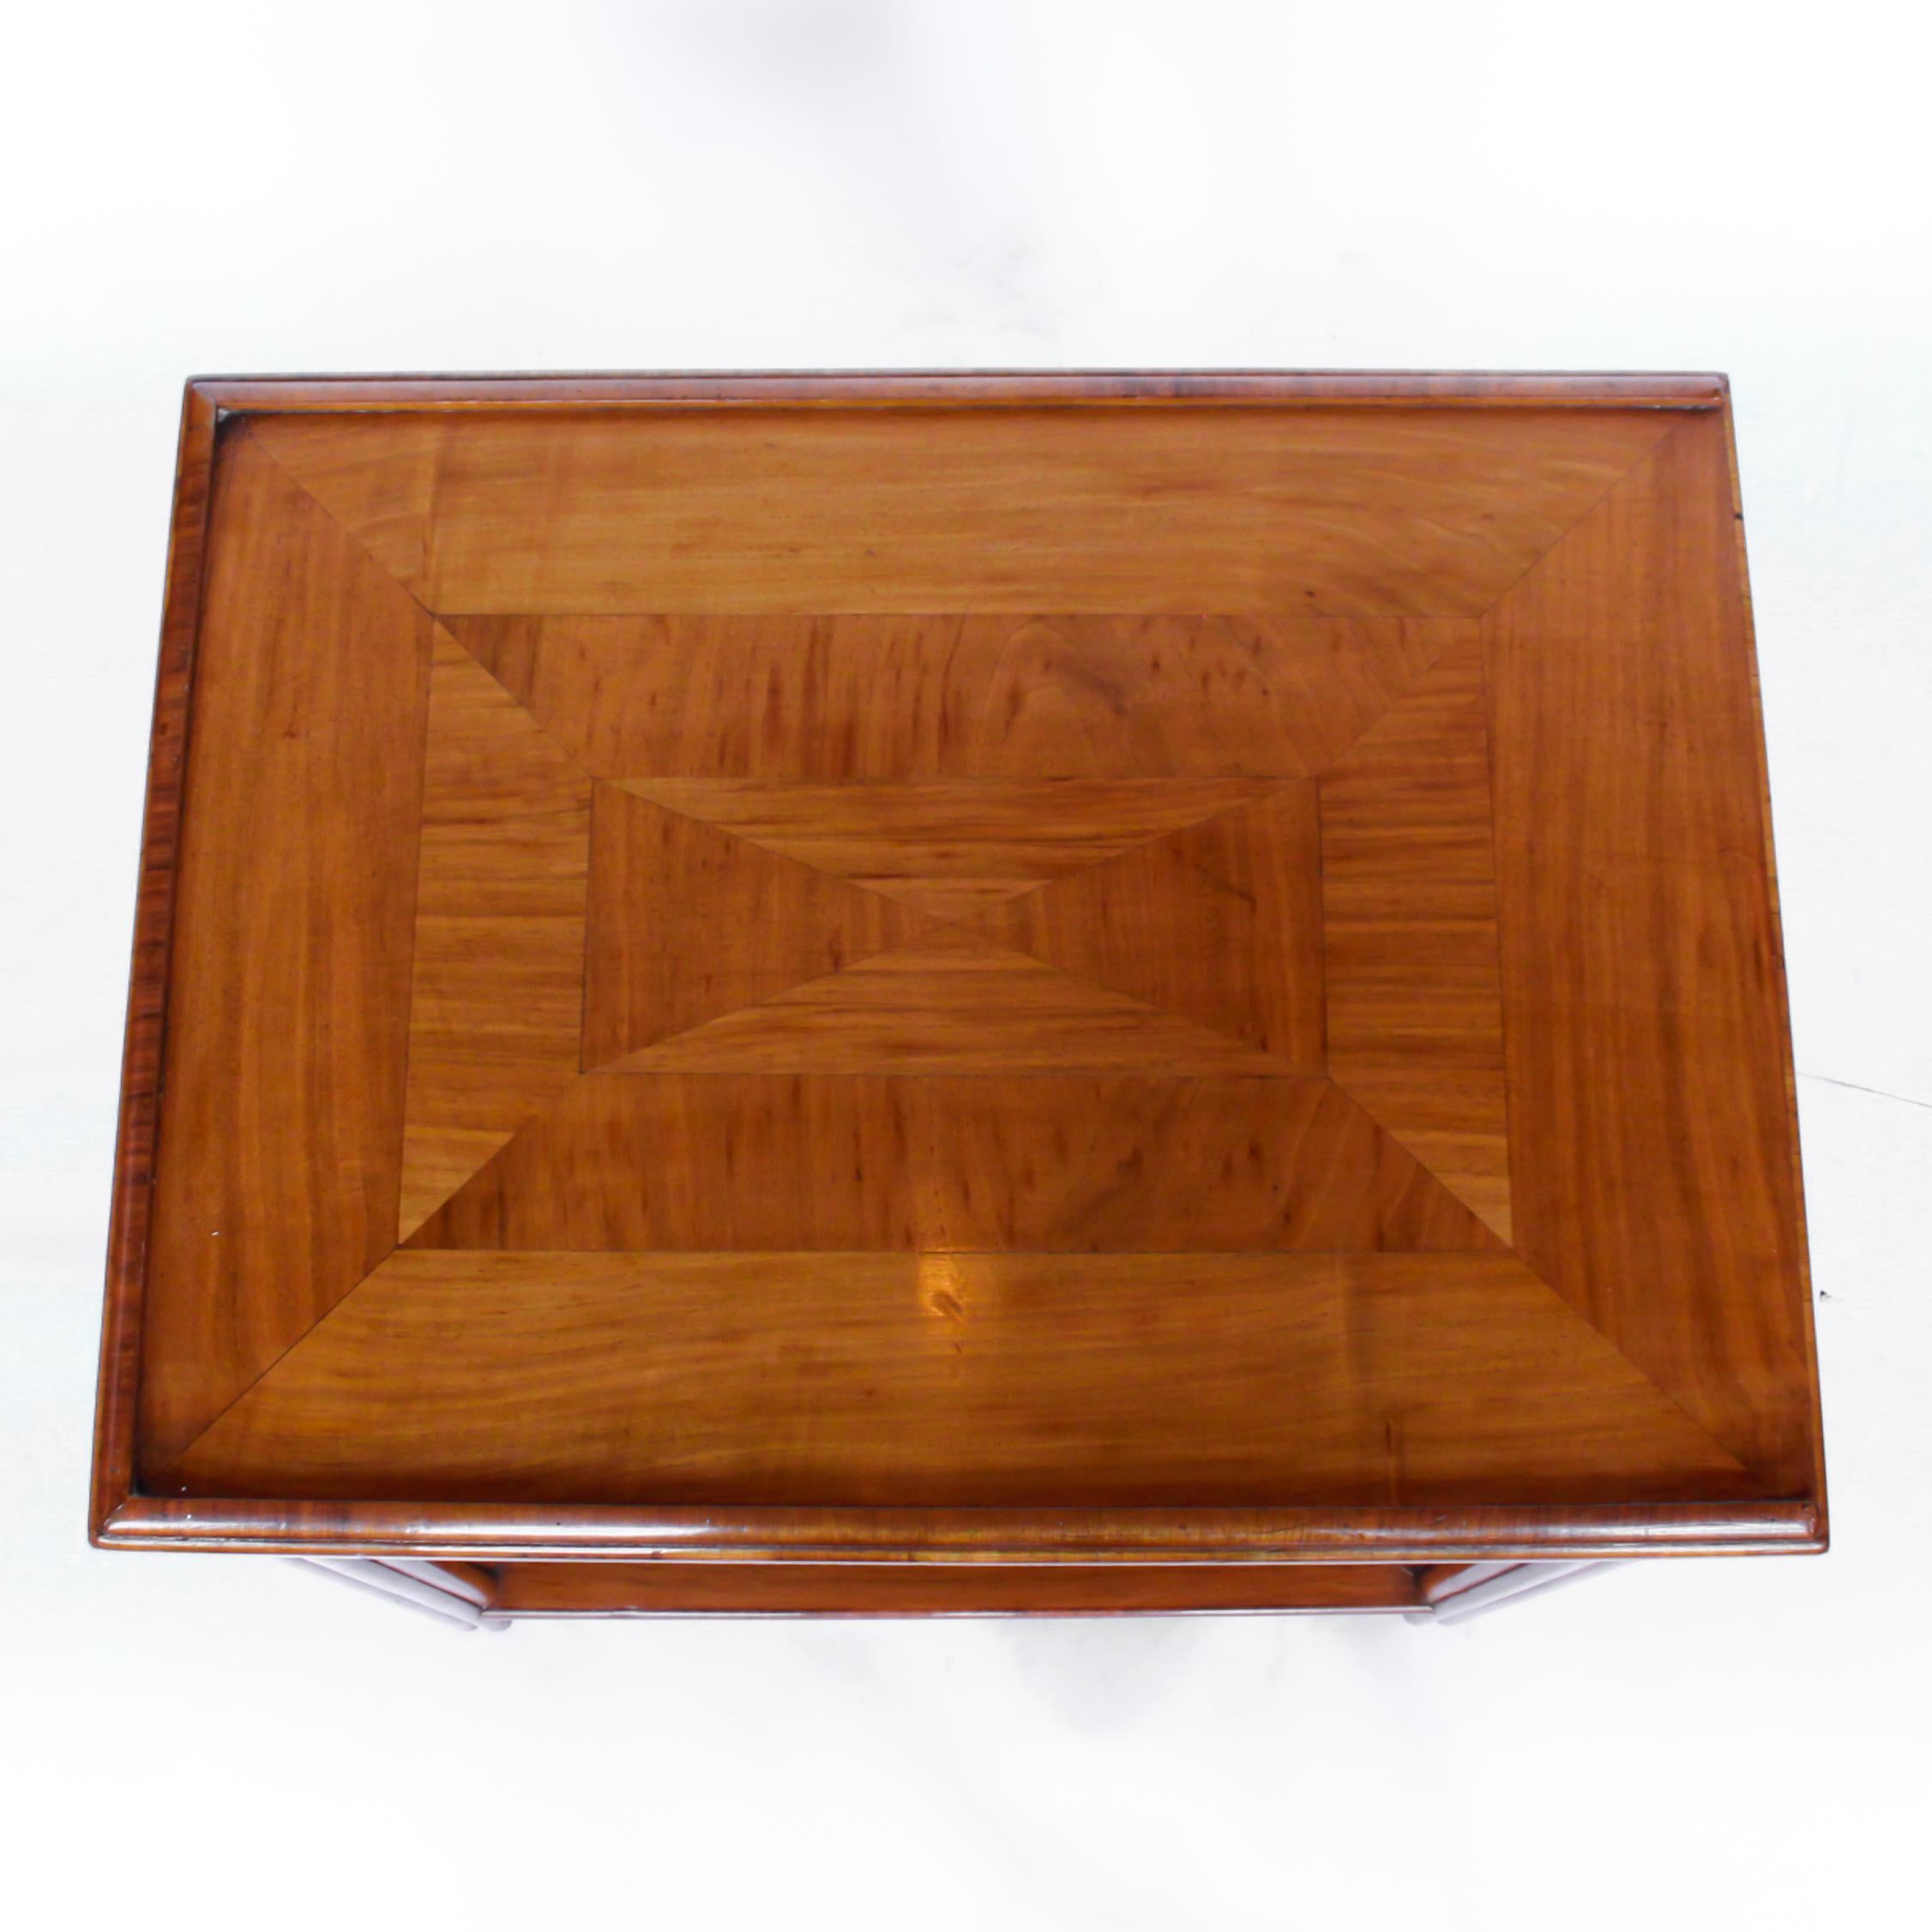 Art Deco Occasional Table Walnut with Sliding Tray and Integral Drawer 1930's 7